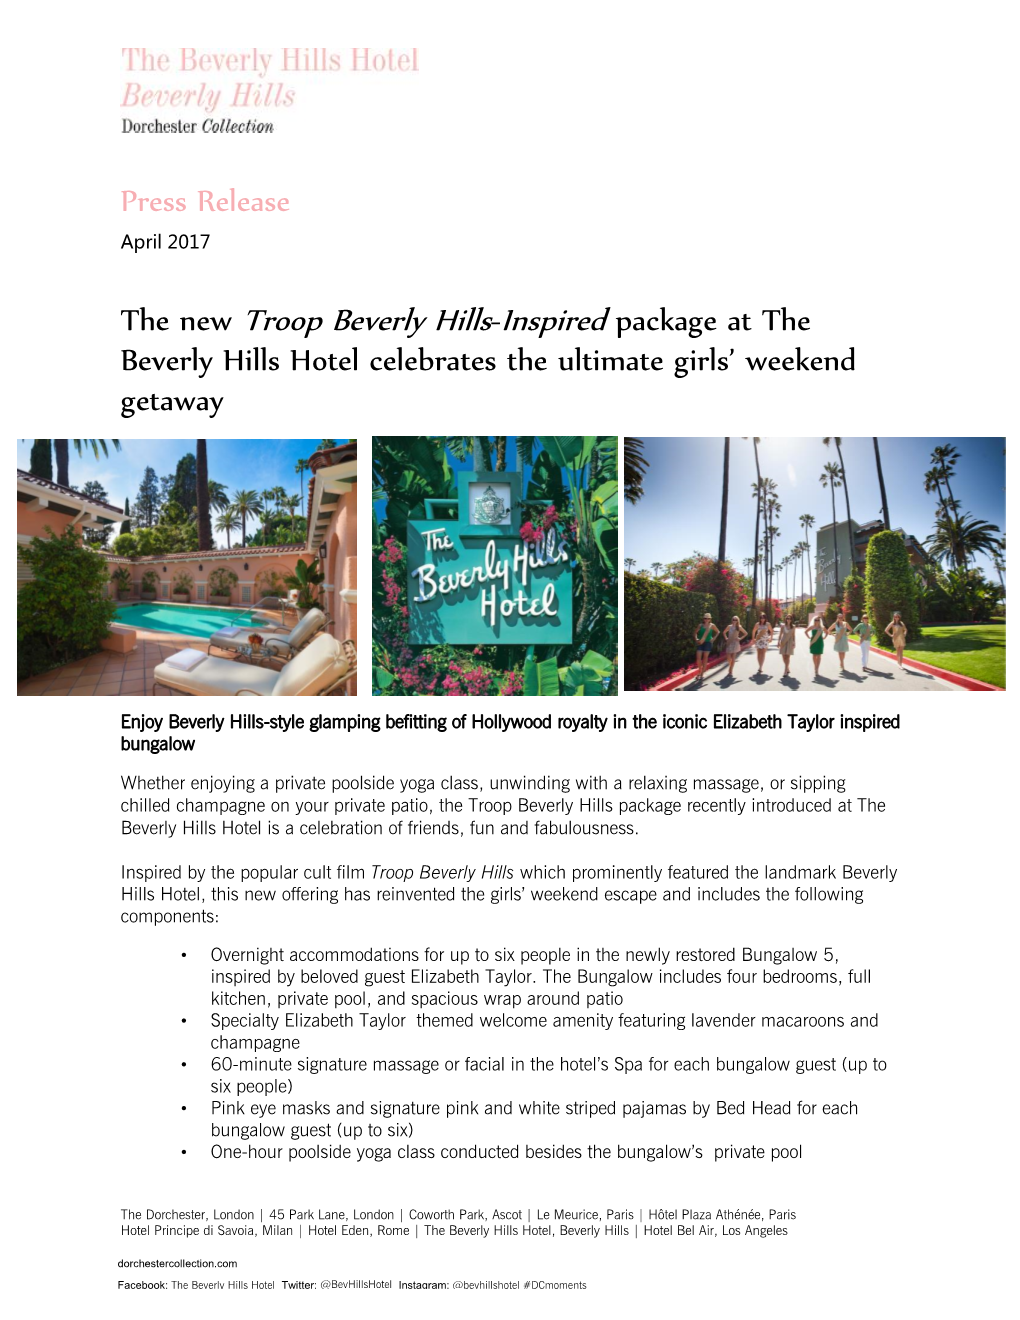 The New Troop Beverly Hills-Inspired Package at the Beverly Hills Hotel Celebrates the Ultimate Girls’ Weekend Getaway